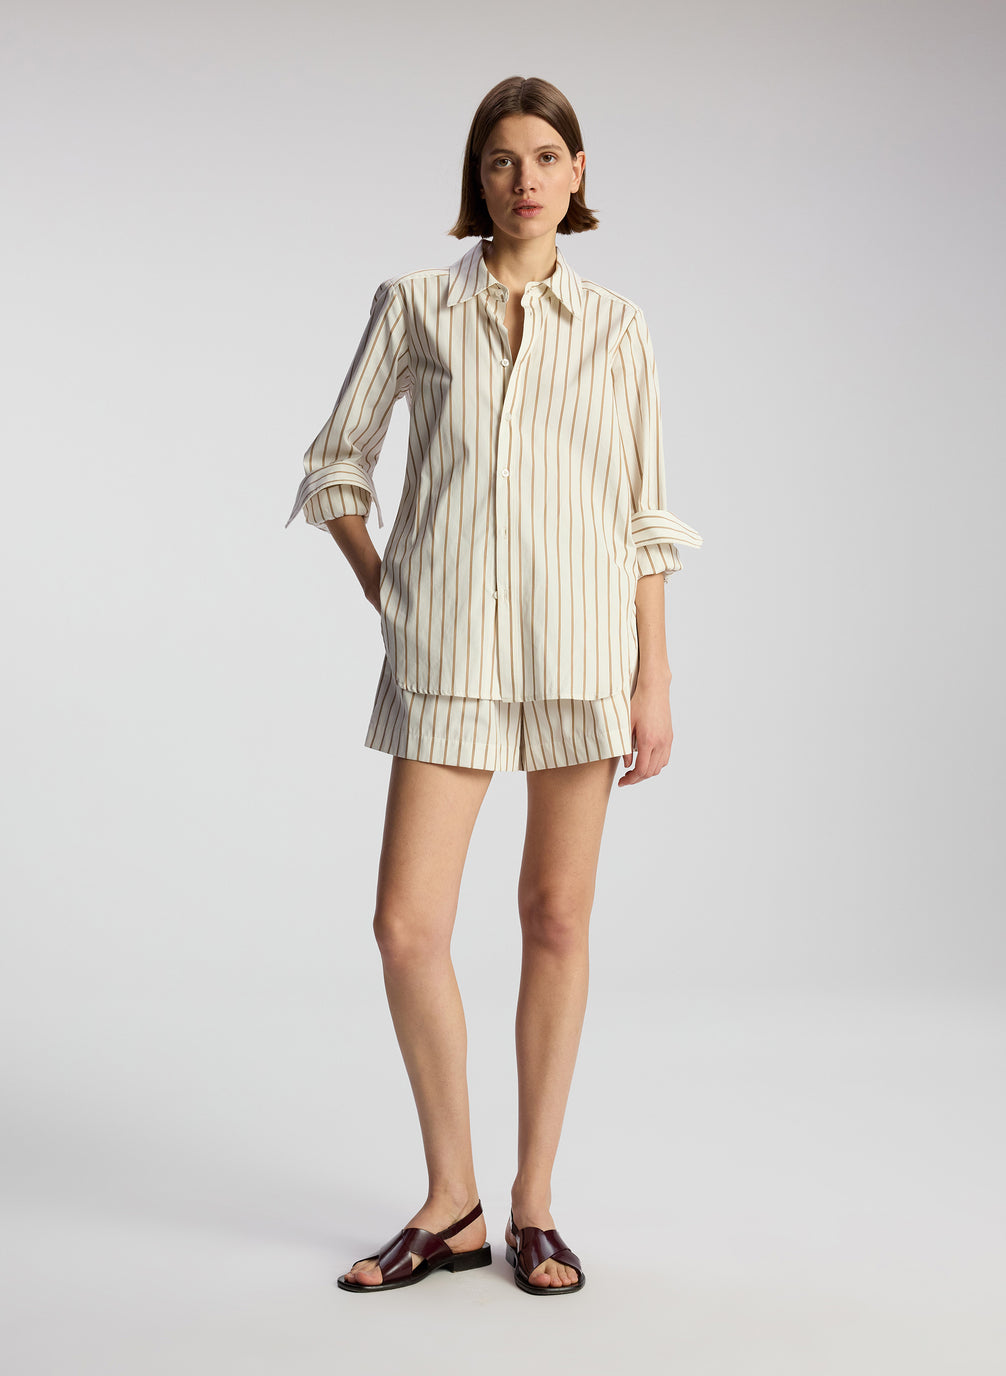 front view of woman wearing striped long sleeve shirt and matching shorts